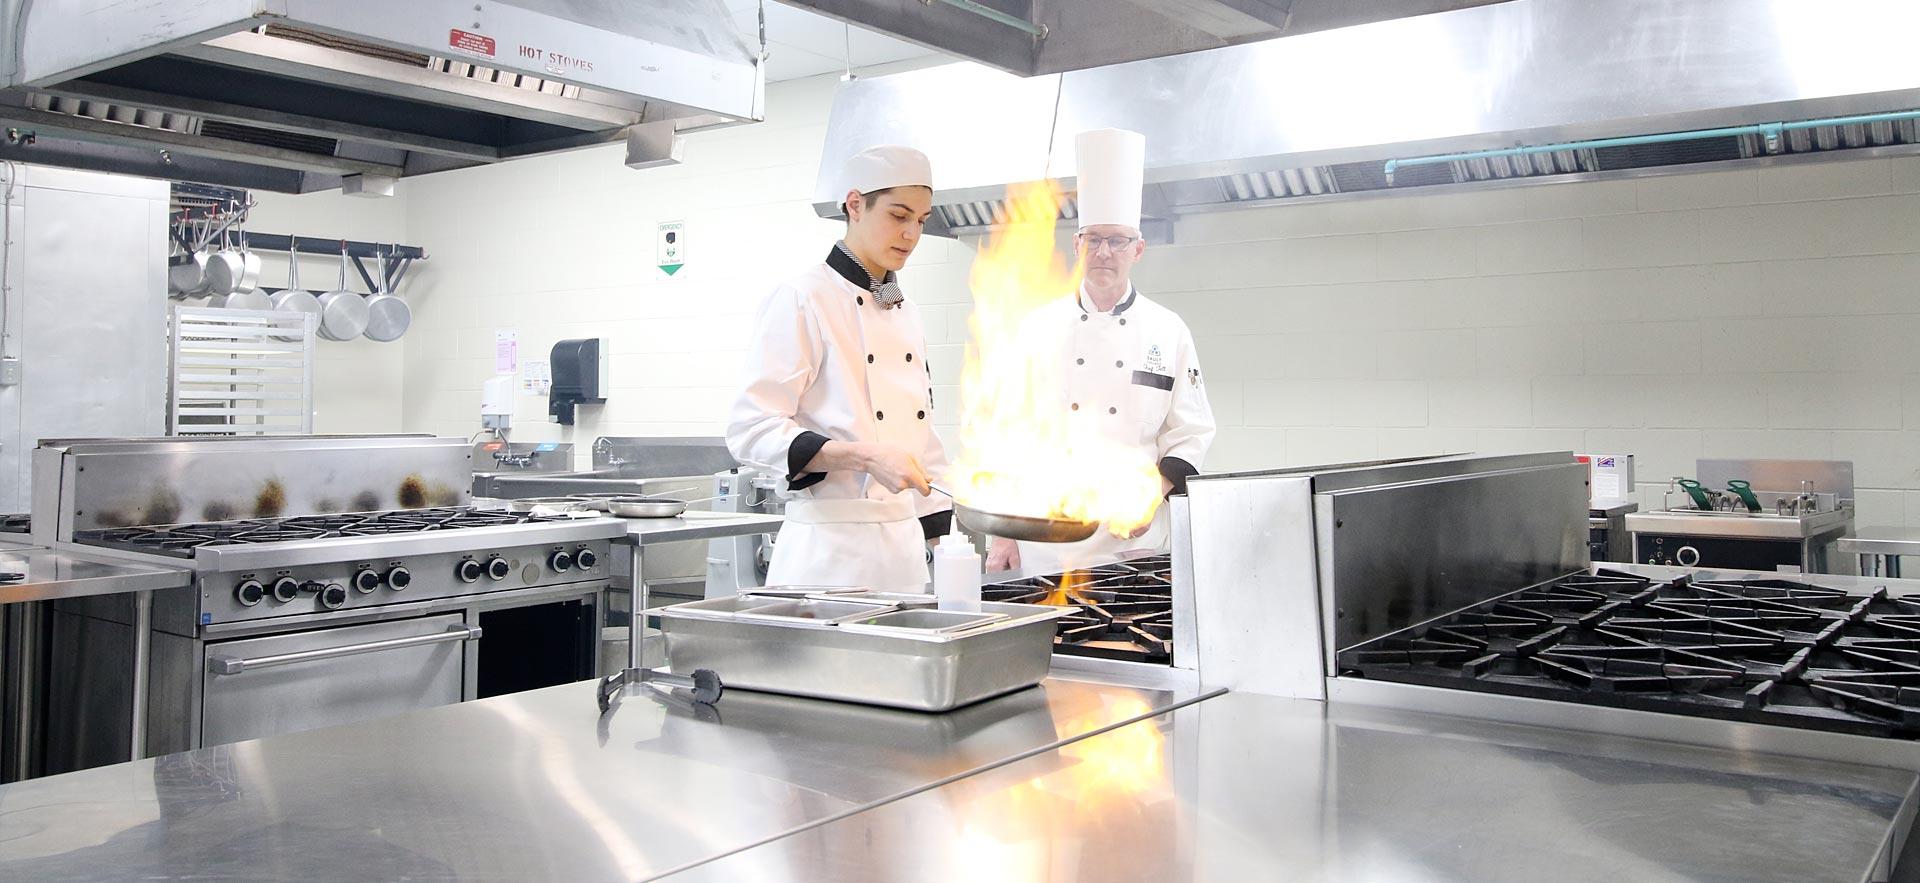 A male culinary student gets instruction on how to create a flambe in one the culinary kitchens.